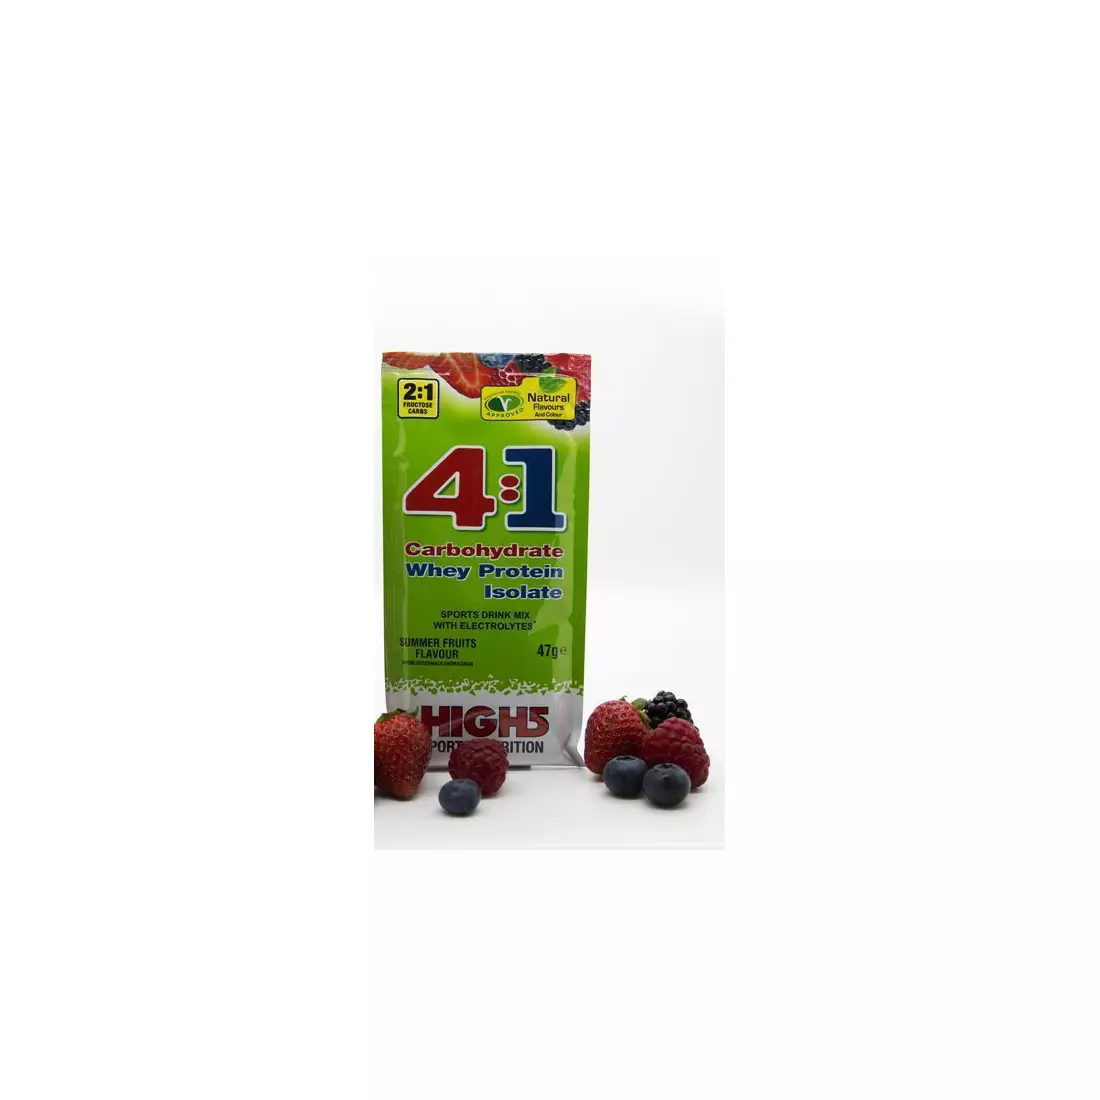 HIGH5 Energy Source 4:1 carbohydrate-protein drink powder to dissolve, sachet 47 g flavor: SUMMER FRUITS